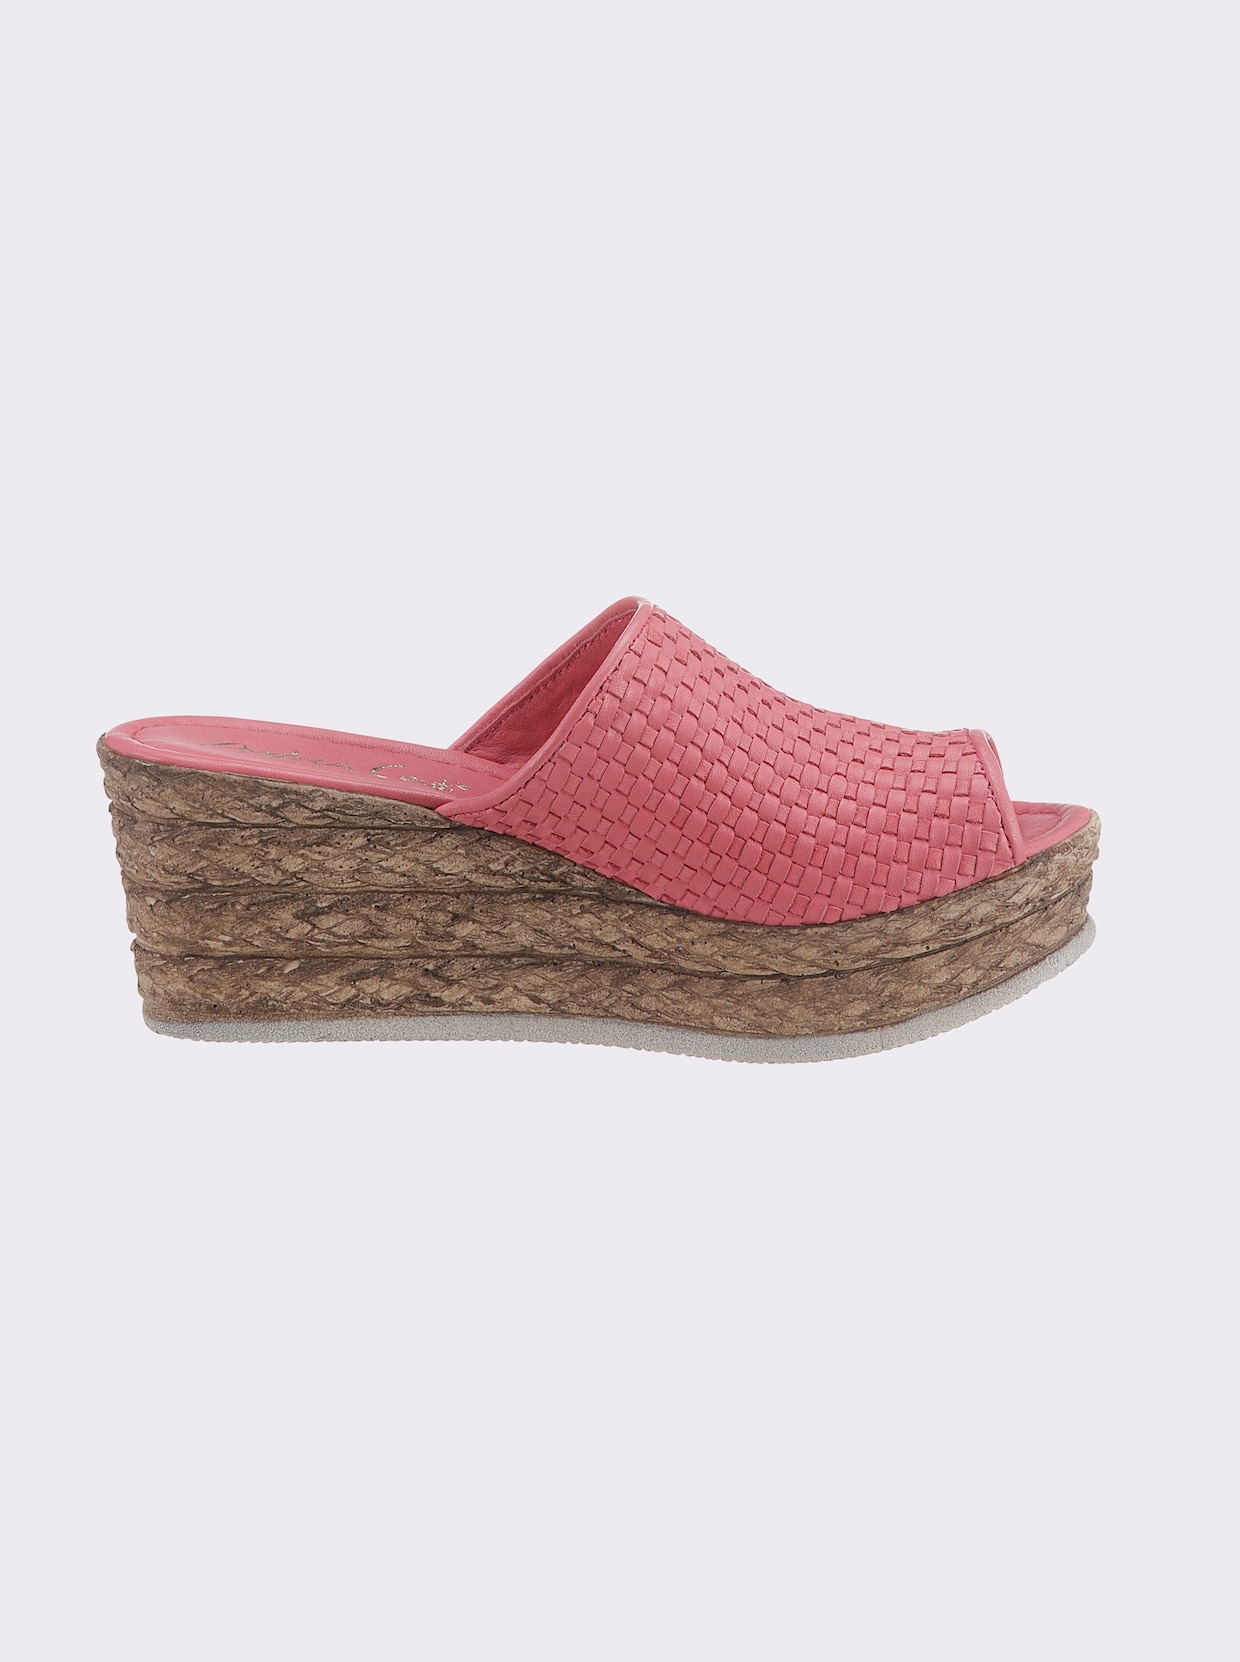 Andrea Conti slippers - pink